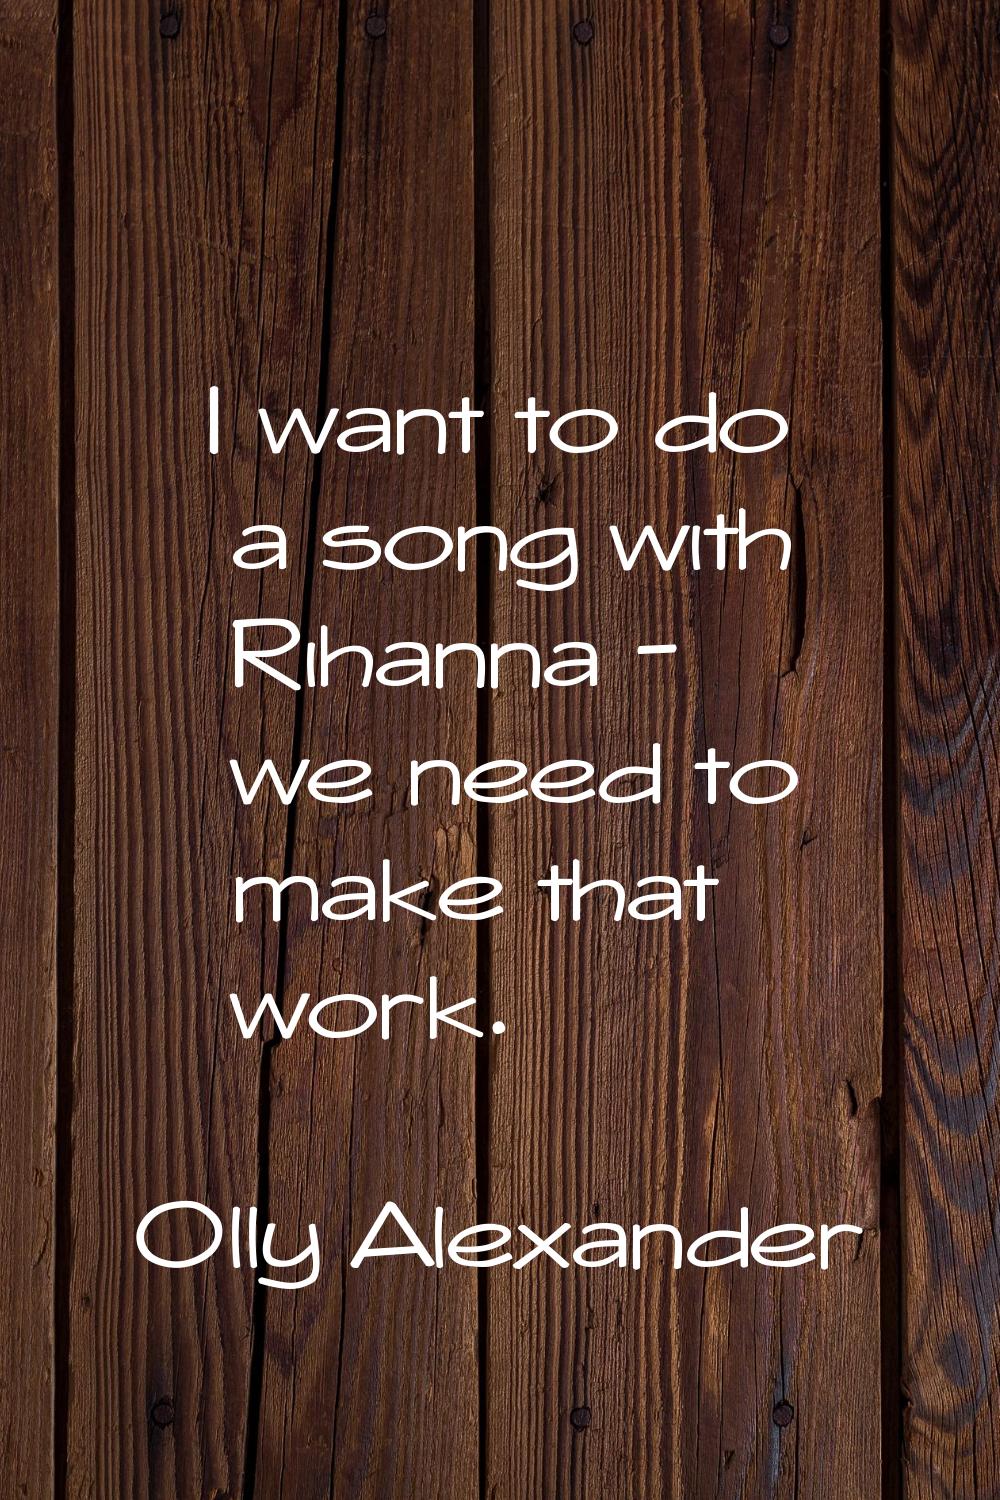 I want to do a song with Rihanna - we need to make that work.